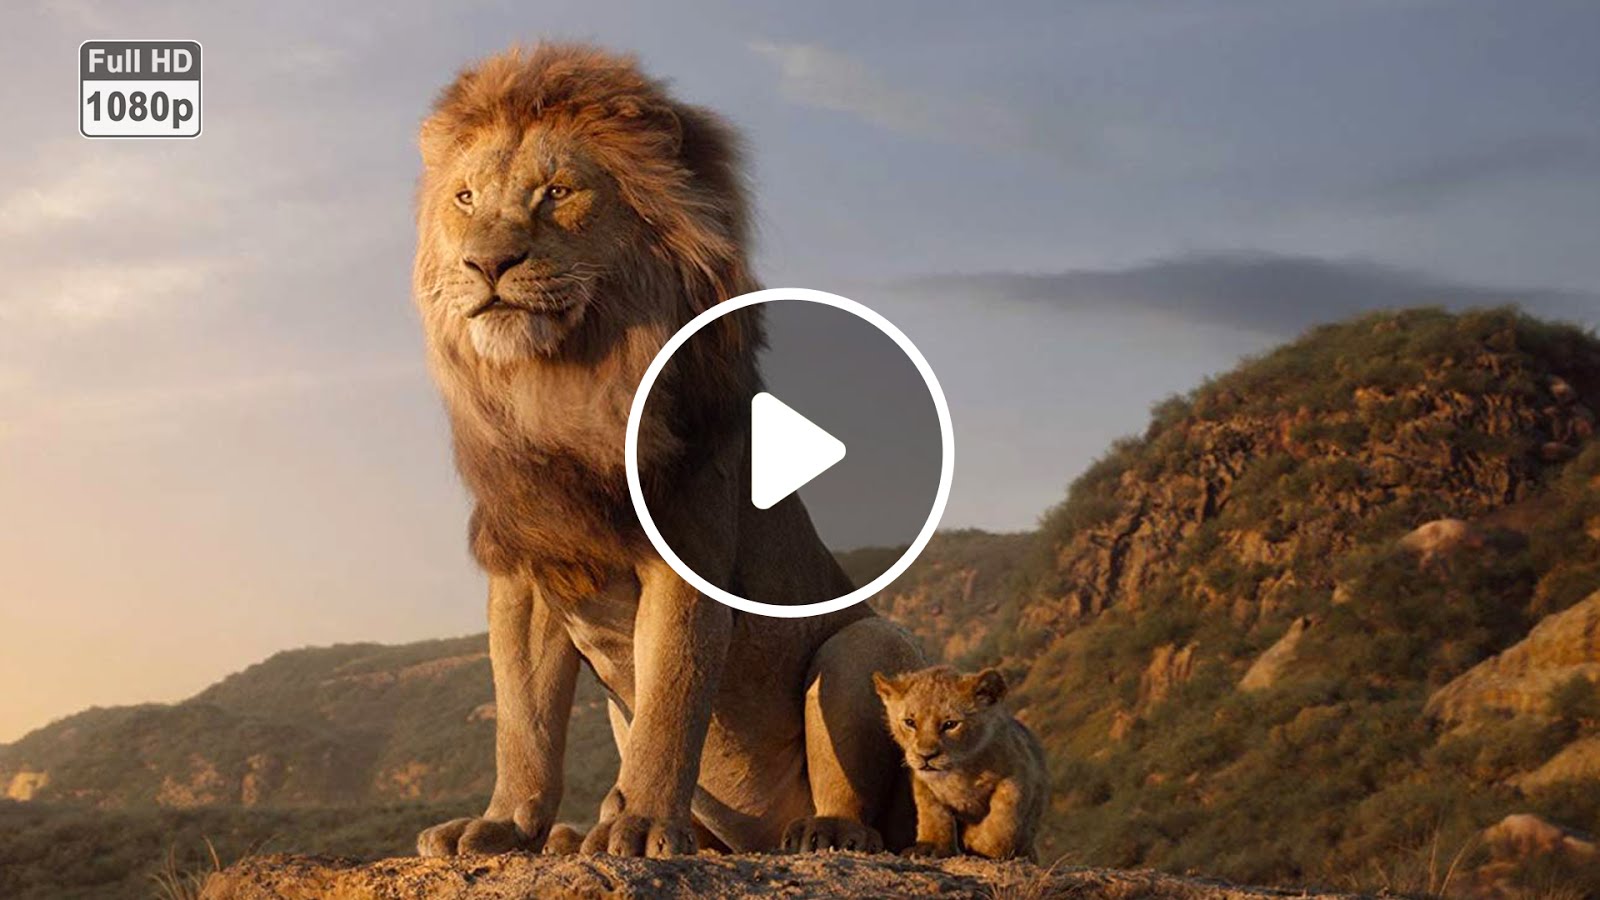 Download D21 FUN The Lion King 2019 1590024428 mp4